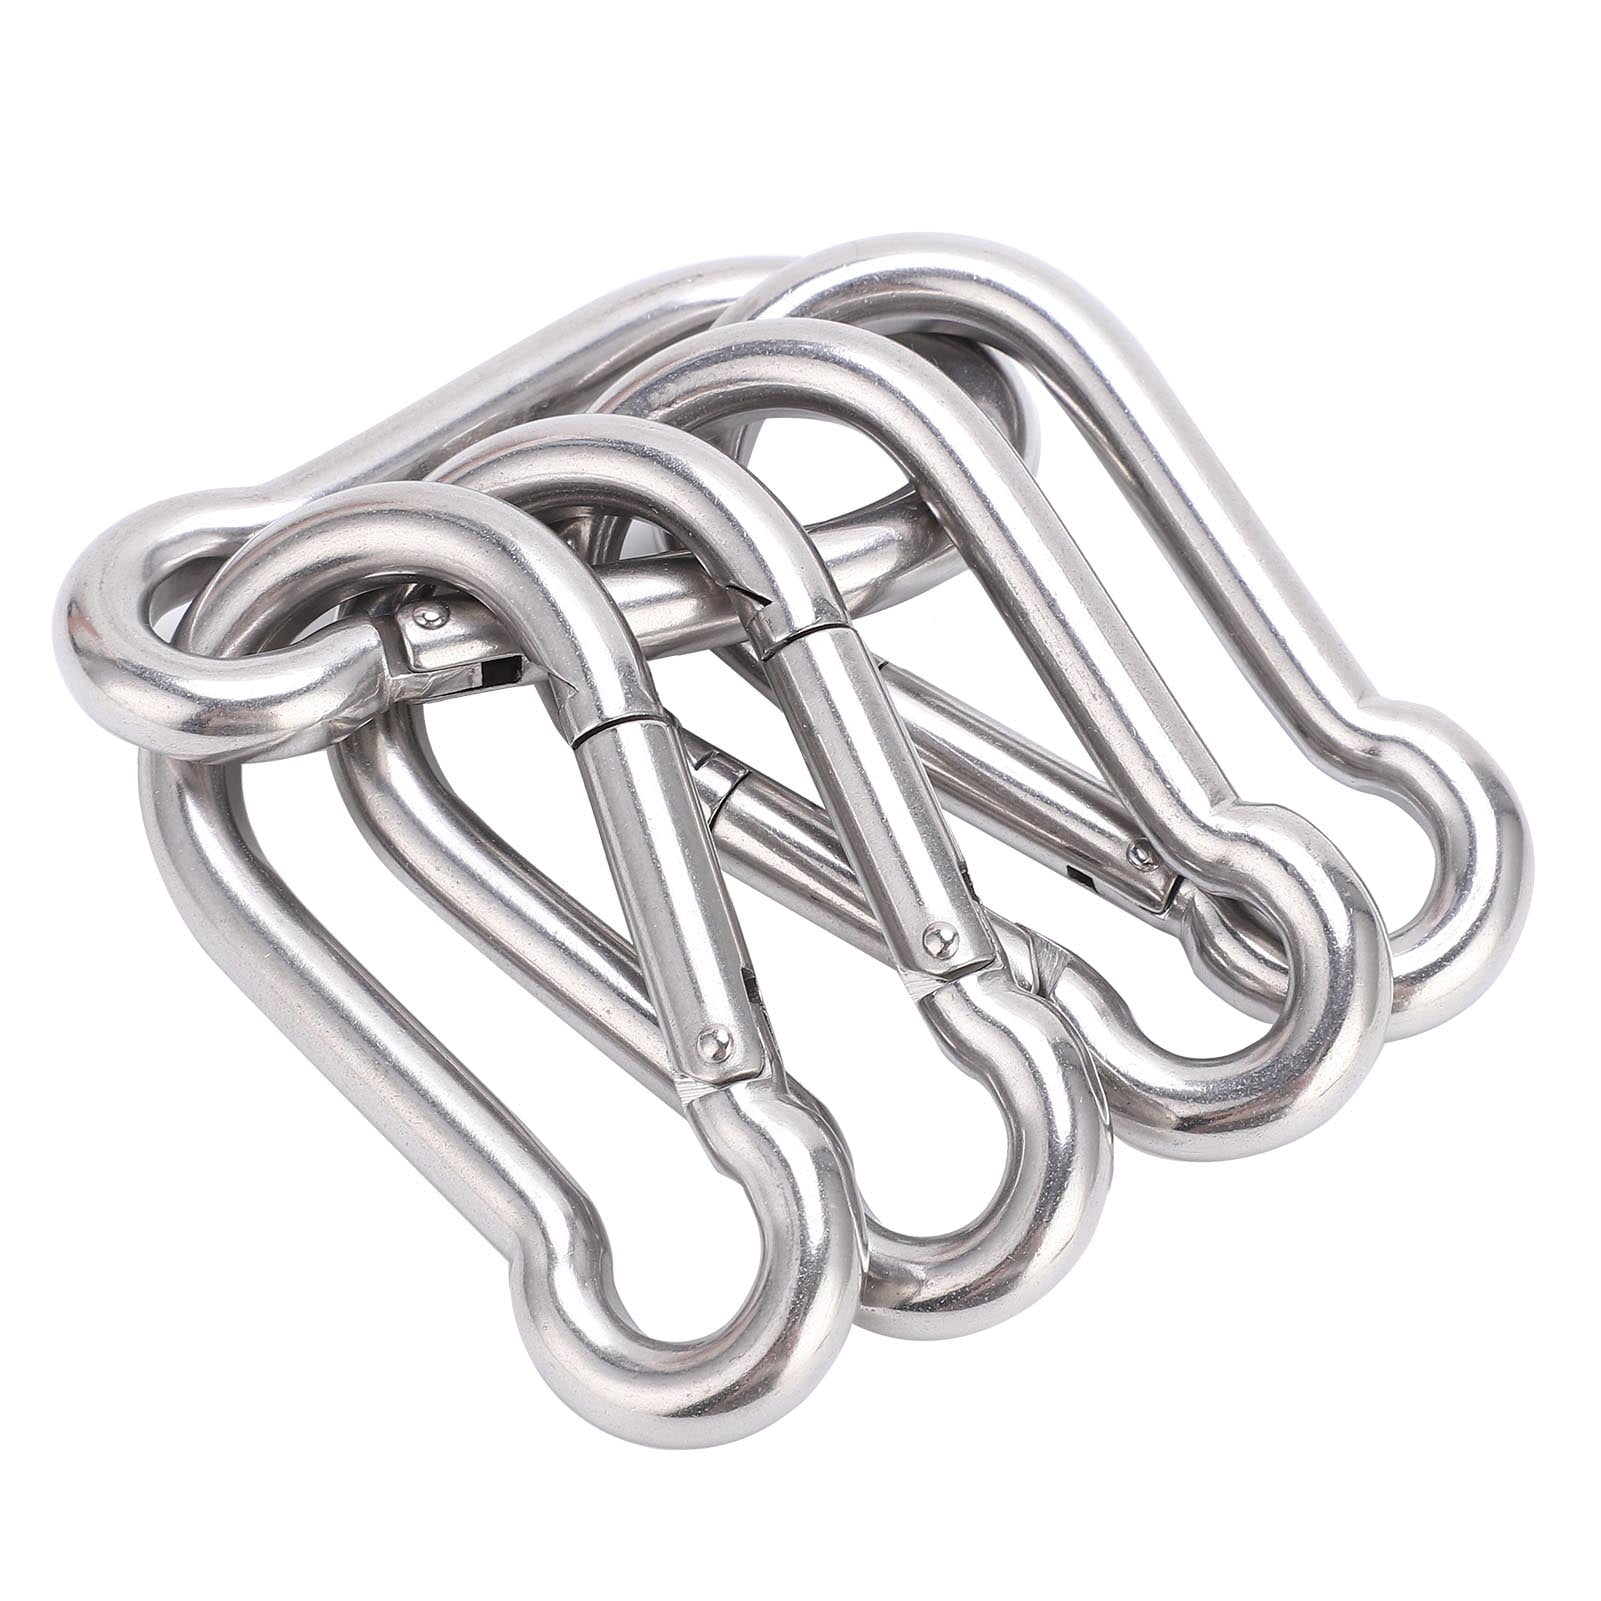 Details about   Hot Mountaineering Rock Climbing Shackle 316 Steel Rotation Connect Snap Hook 